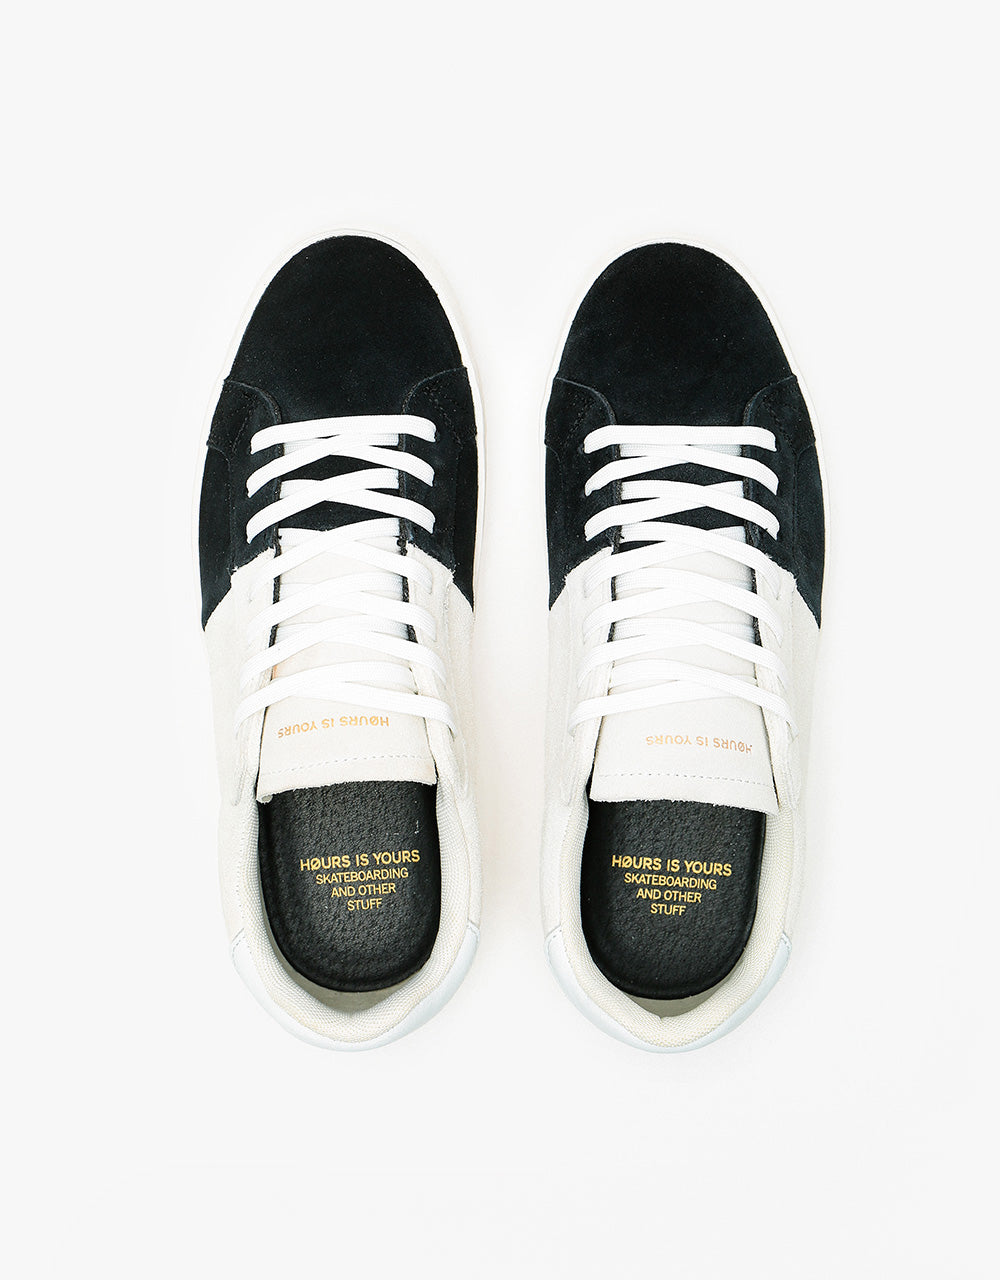 HØURS IS YOURS C71 Skate Shoes - Black/White